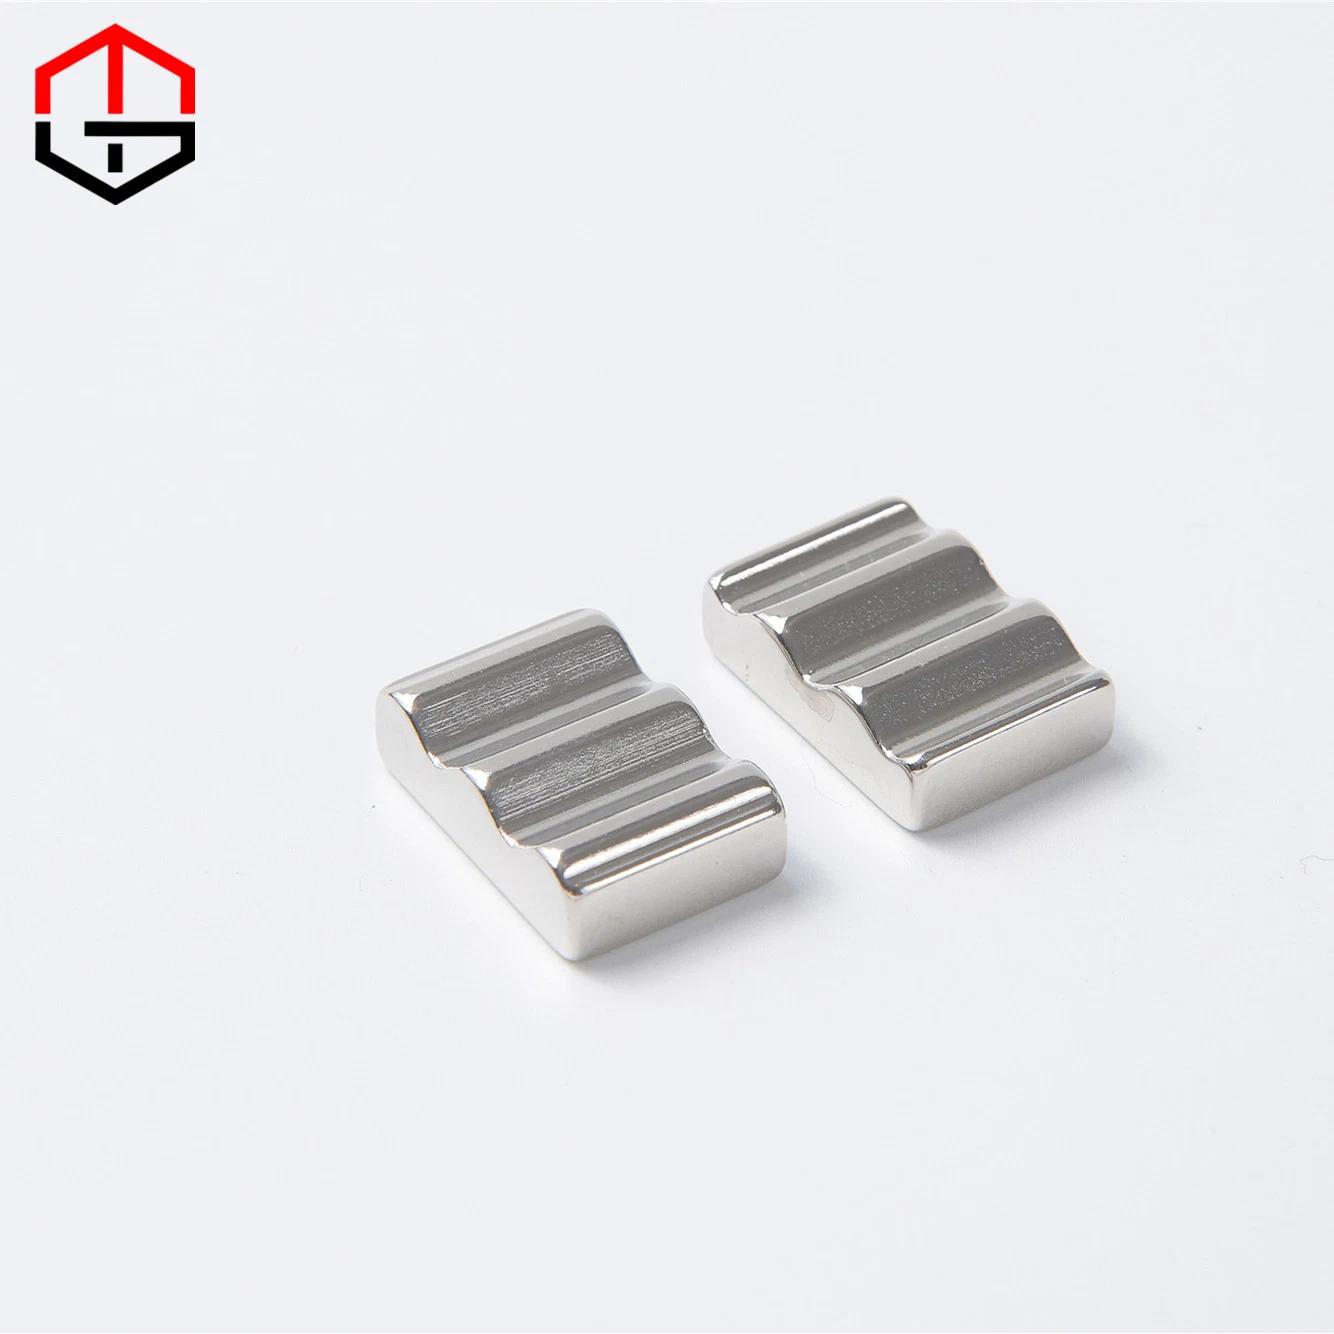 Strong Permanent Neo Magnet Filtration Equipment and Components Magnetic Components Rare Earth Magnet